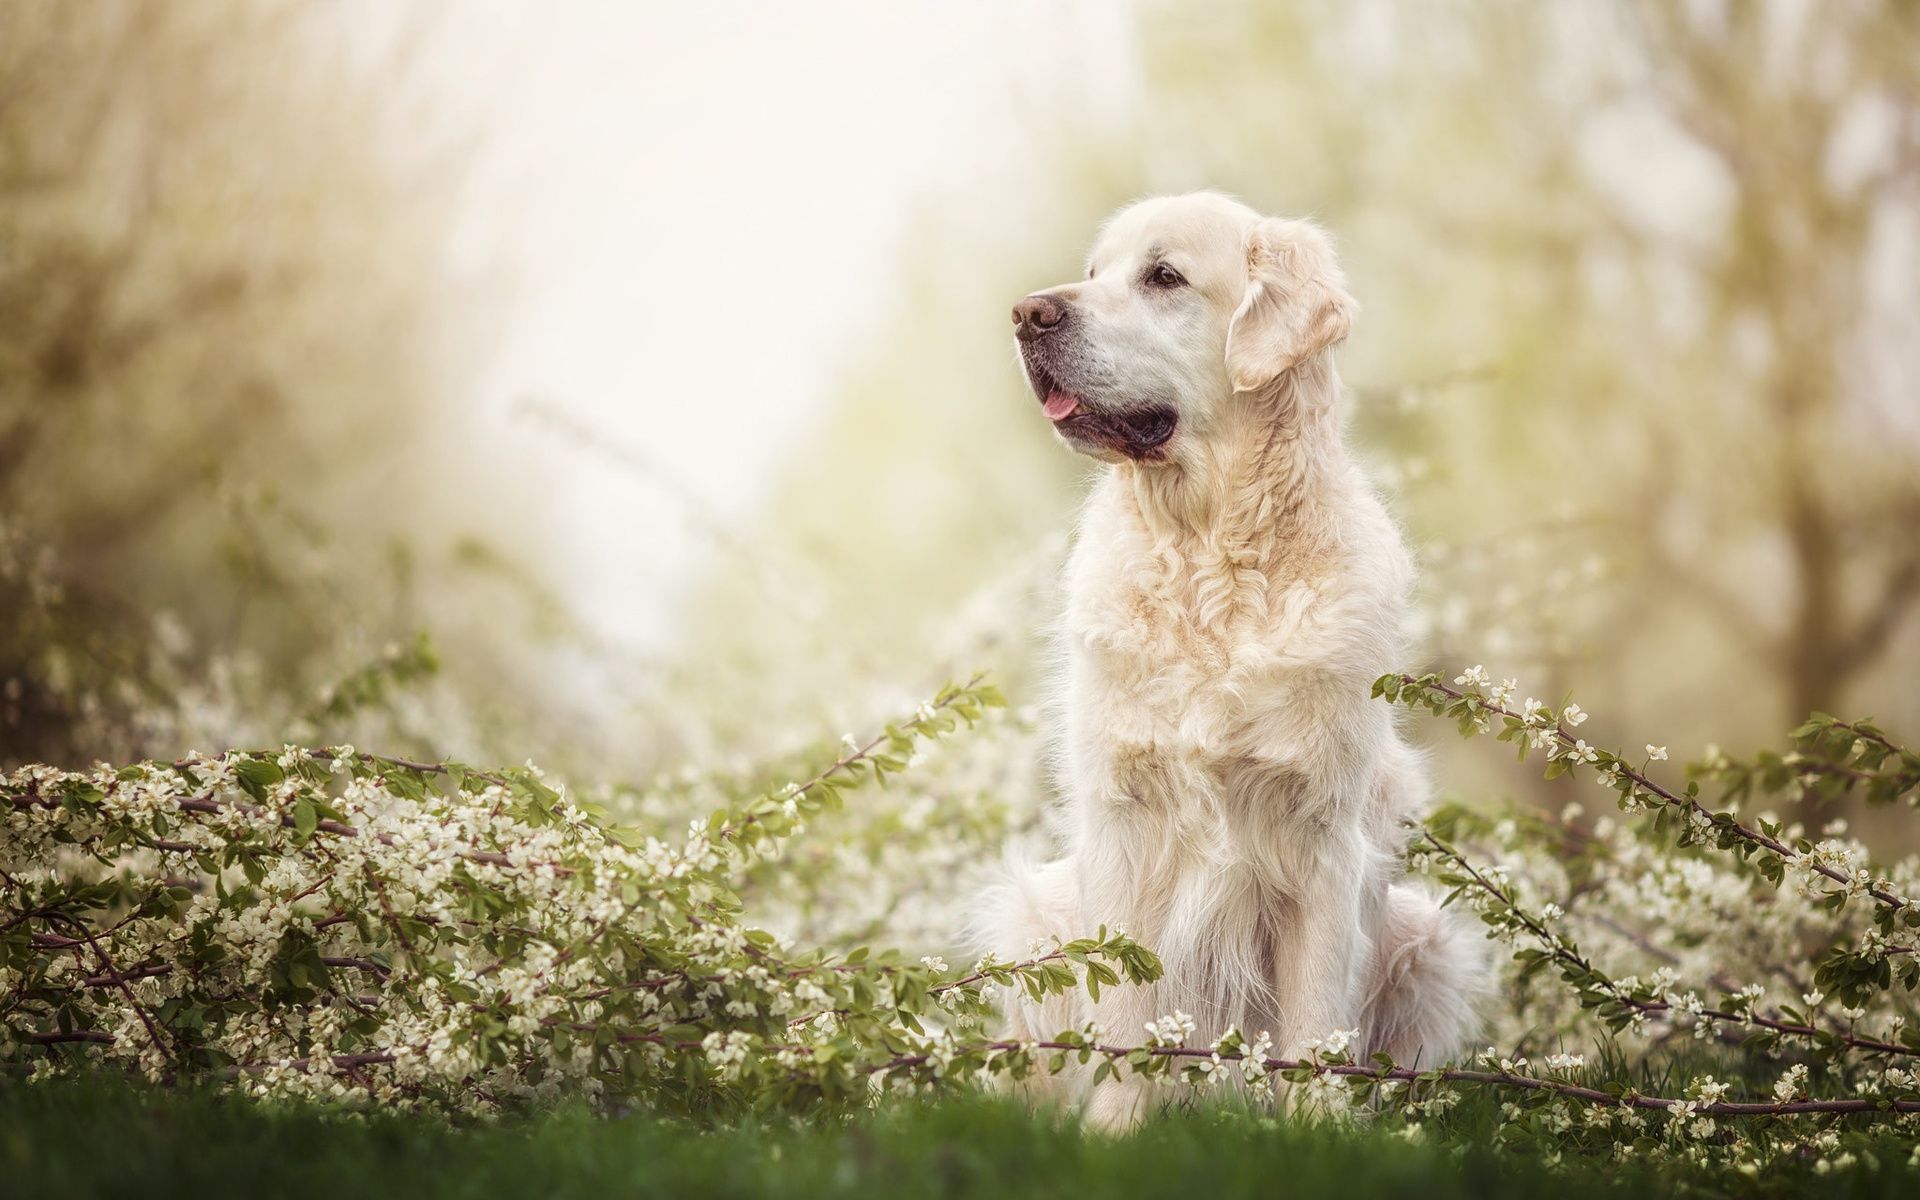 Download wallpaper Golden Retriever Dog, forest, labradors, dogs, spring, pets, cute dogs, Golden Retriever for desktop with resolution 1920x1200. High Quality HD picture wallpaper